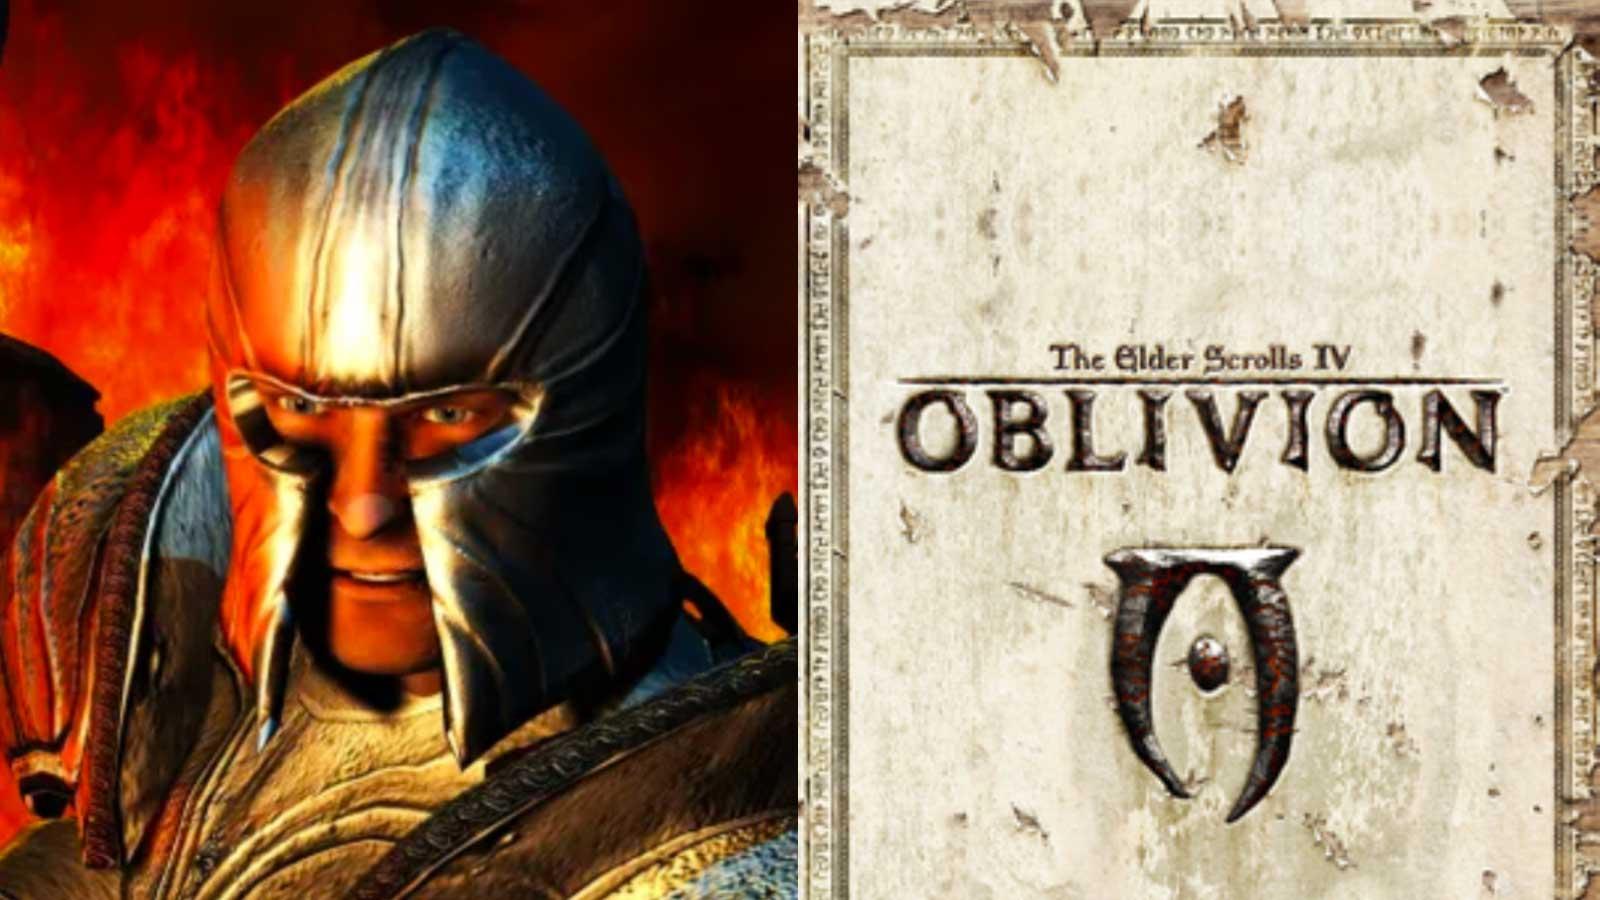 Elder Scrolls 4: Oblivion cover art and a character from the game looking at the screen